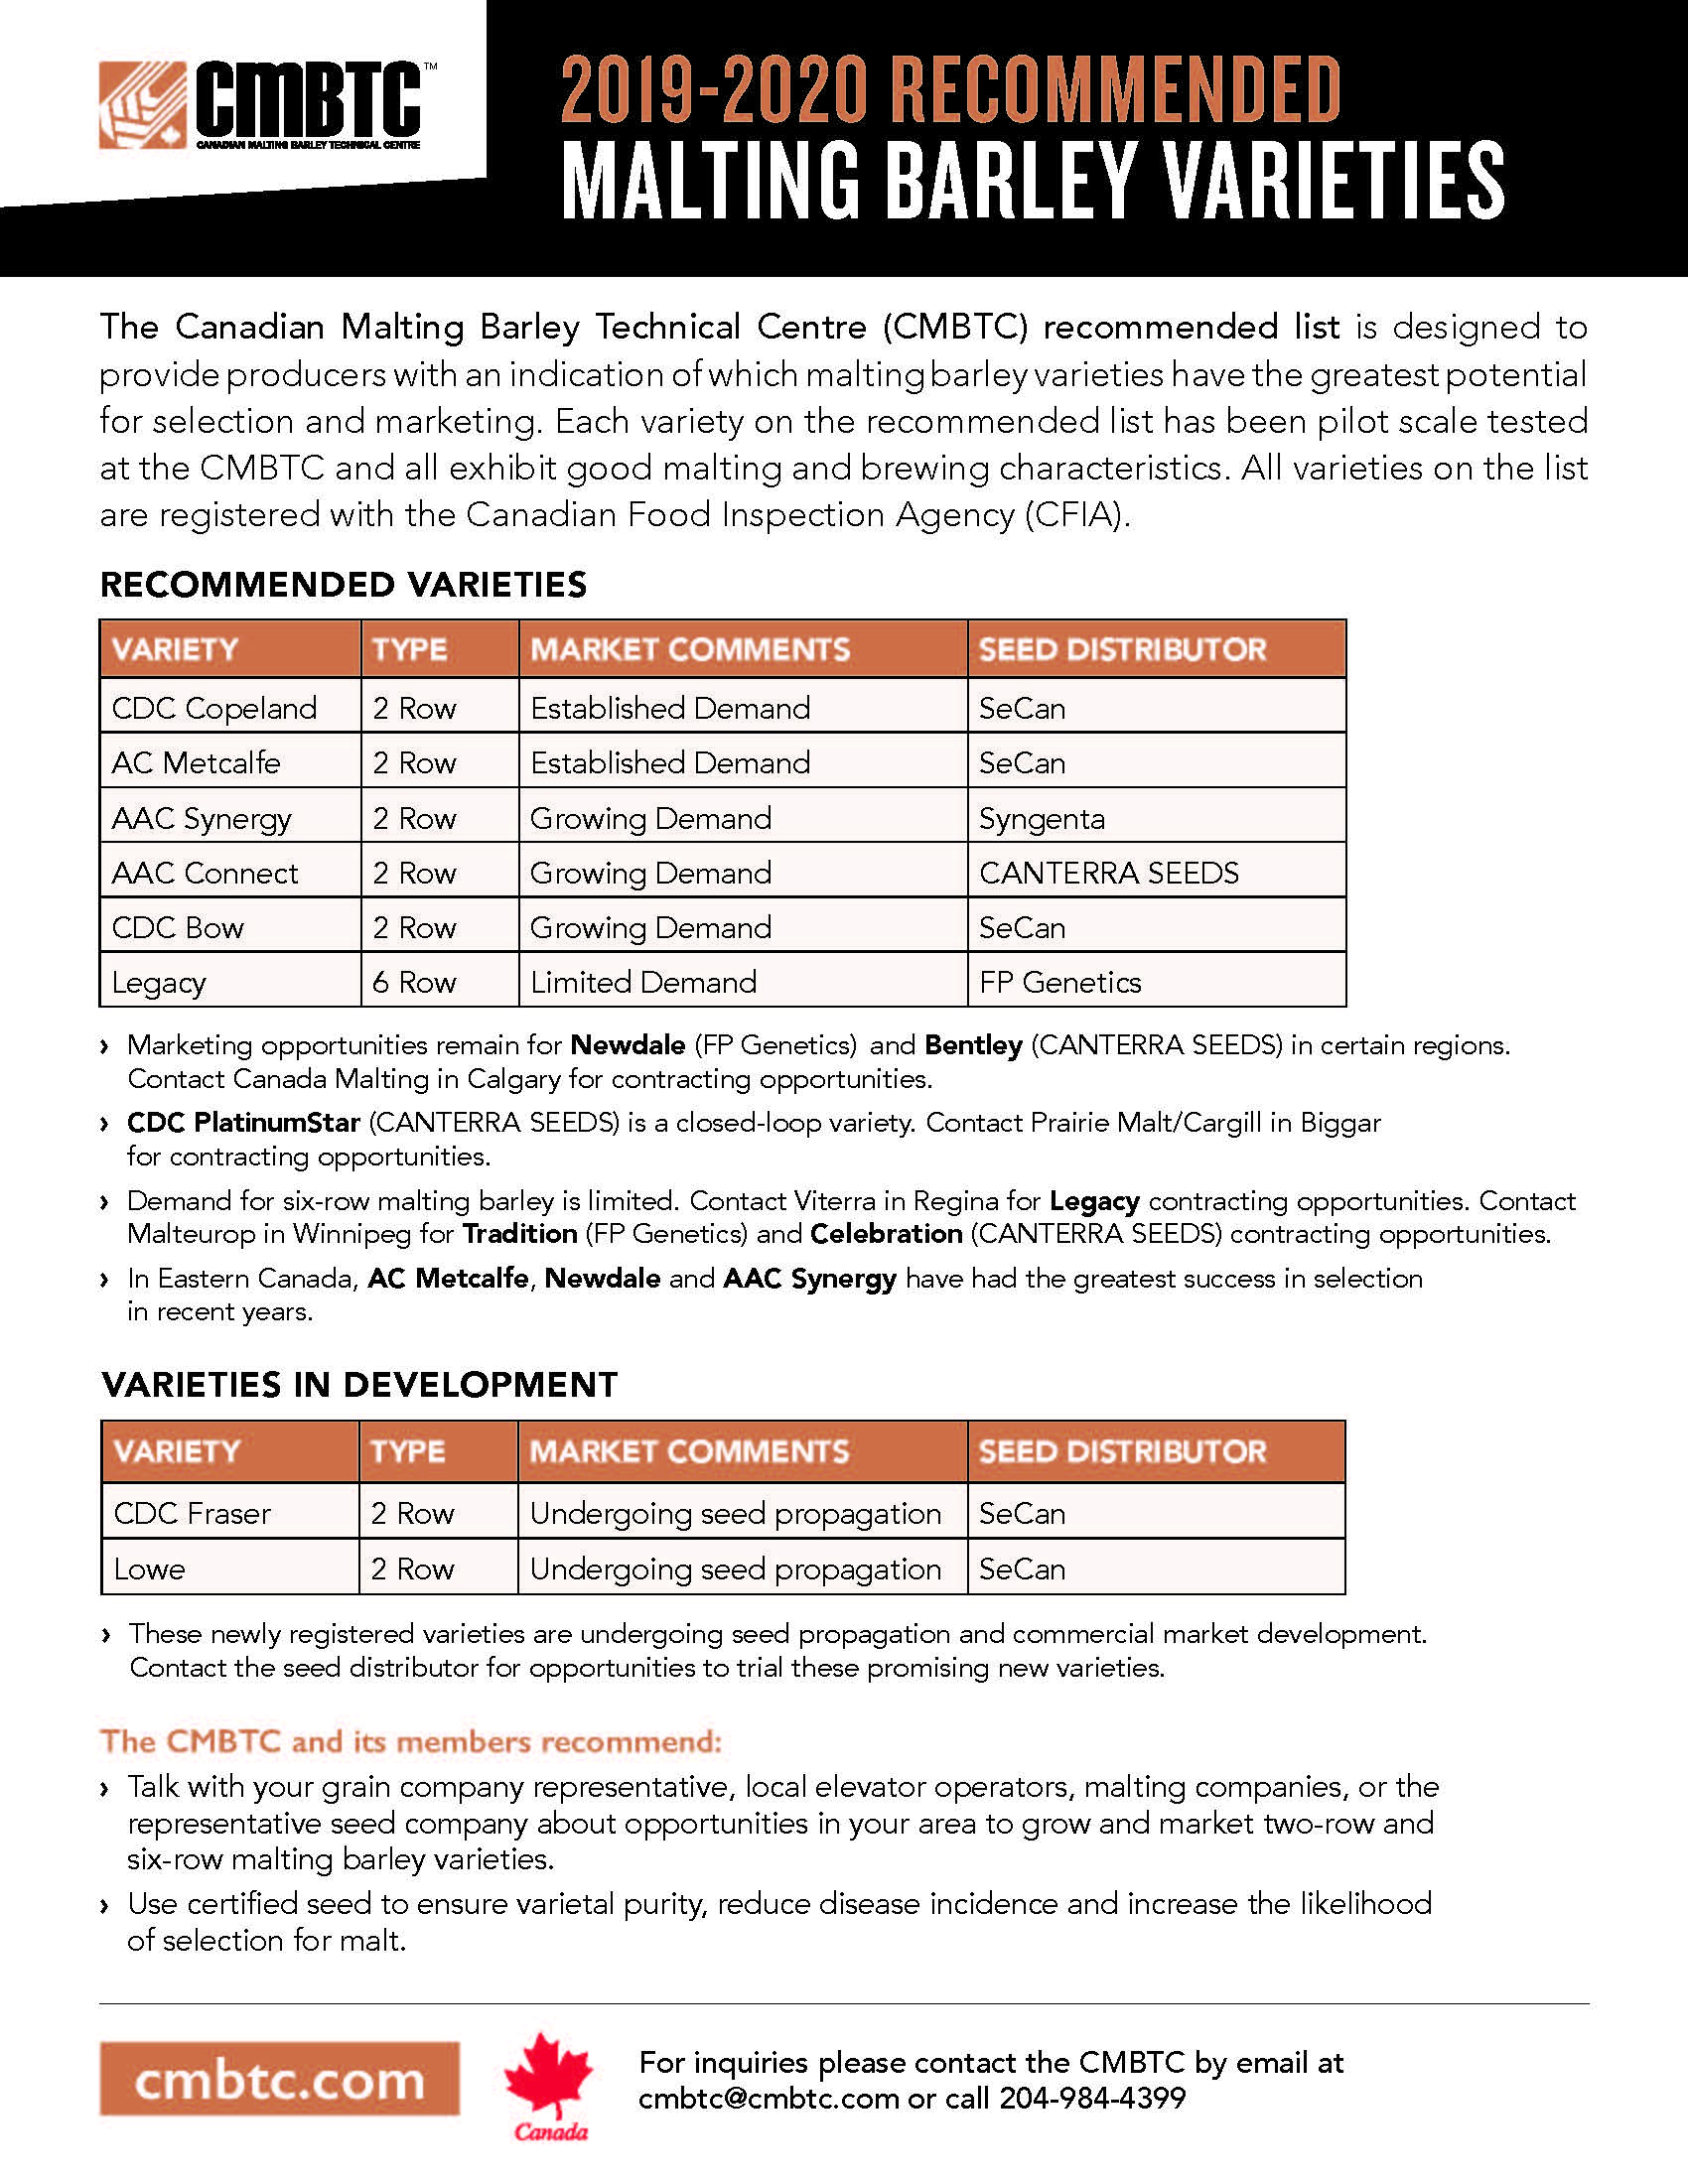 CMBTC-2019-20-Recommended-Malting-Barley-Varieties